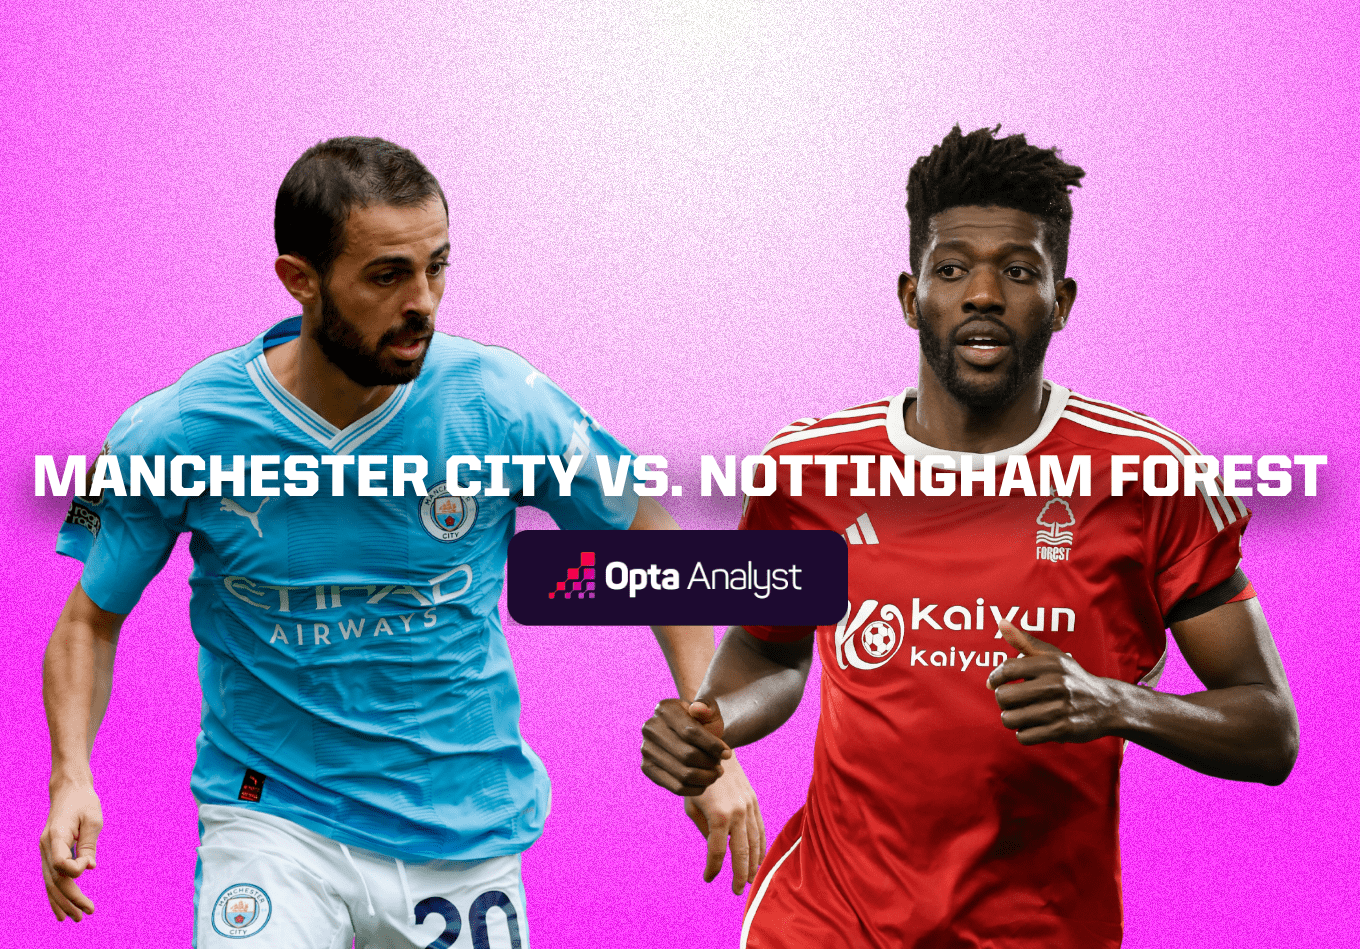 Manchester City vs Nottingham Forest: Prediction and Preview | The Analyst